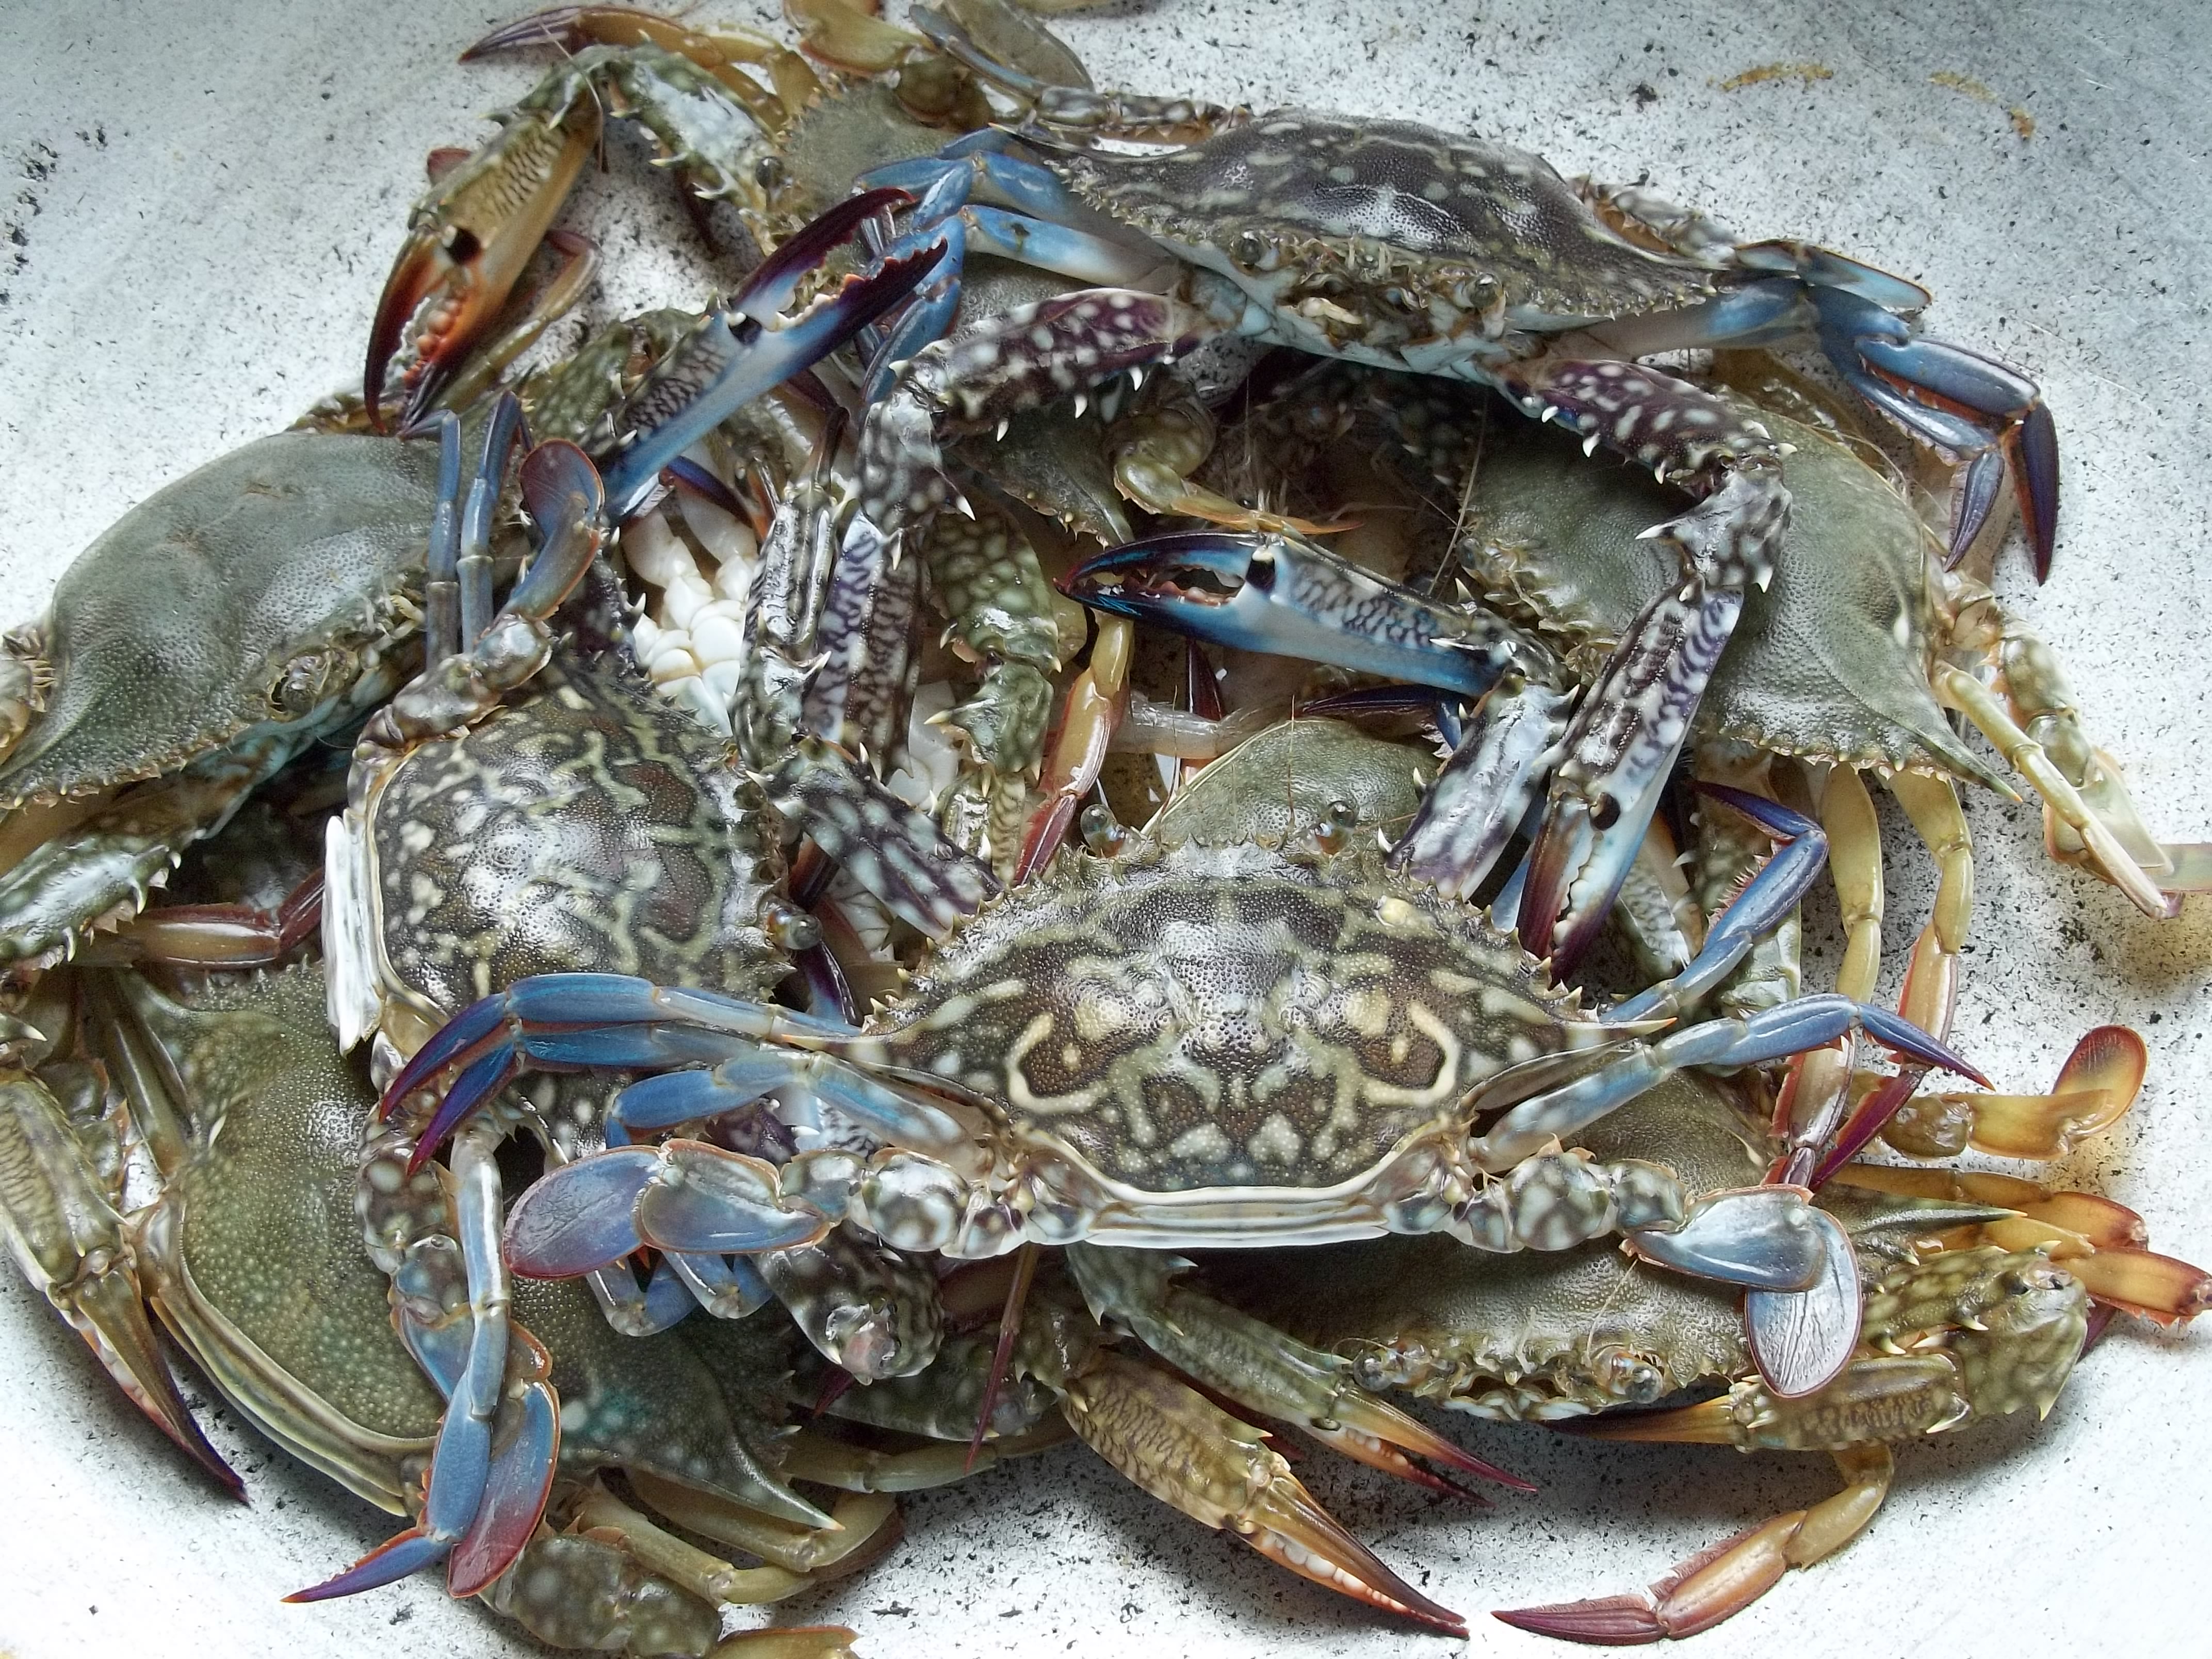 Blue crabs from Panguil Bay – Snapshots by Twinkle